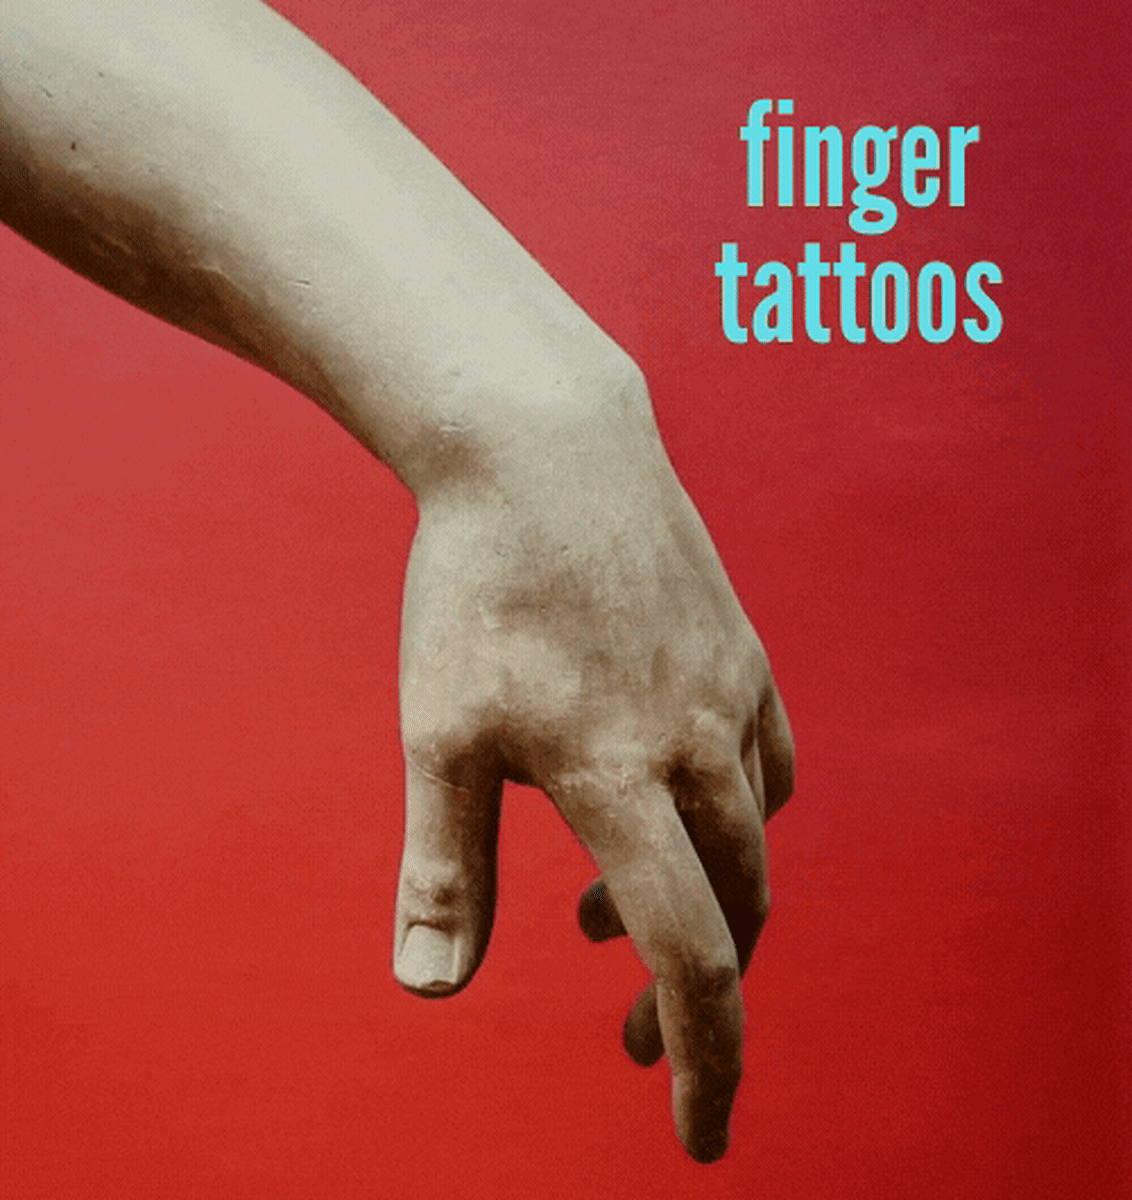 Yes, a Finger Tattoo Will Fade (and Answers to All Your Questions About Finger Ink)